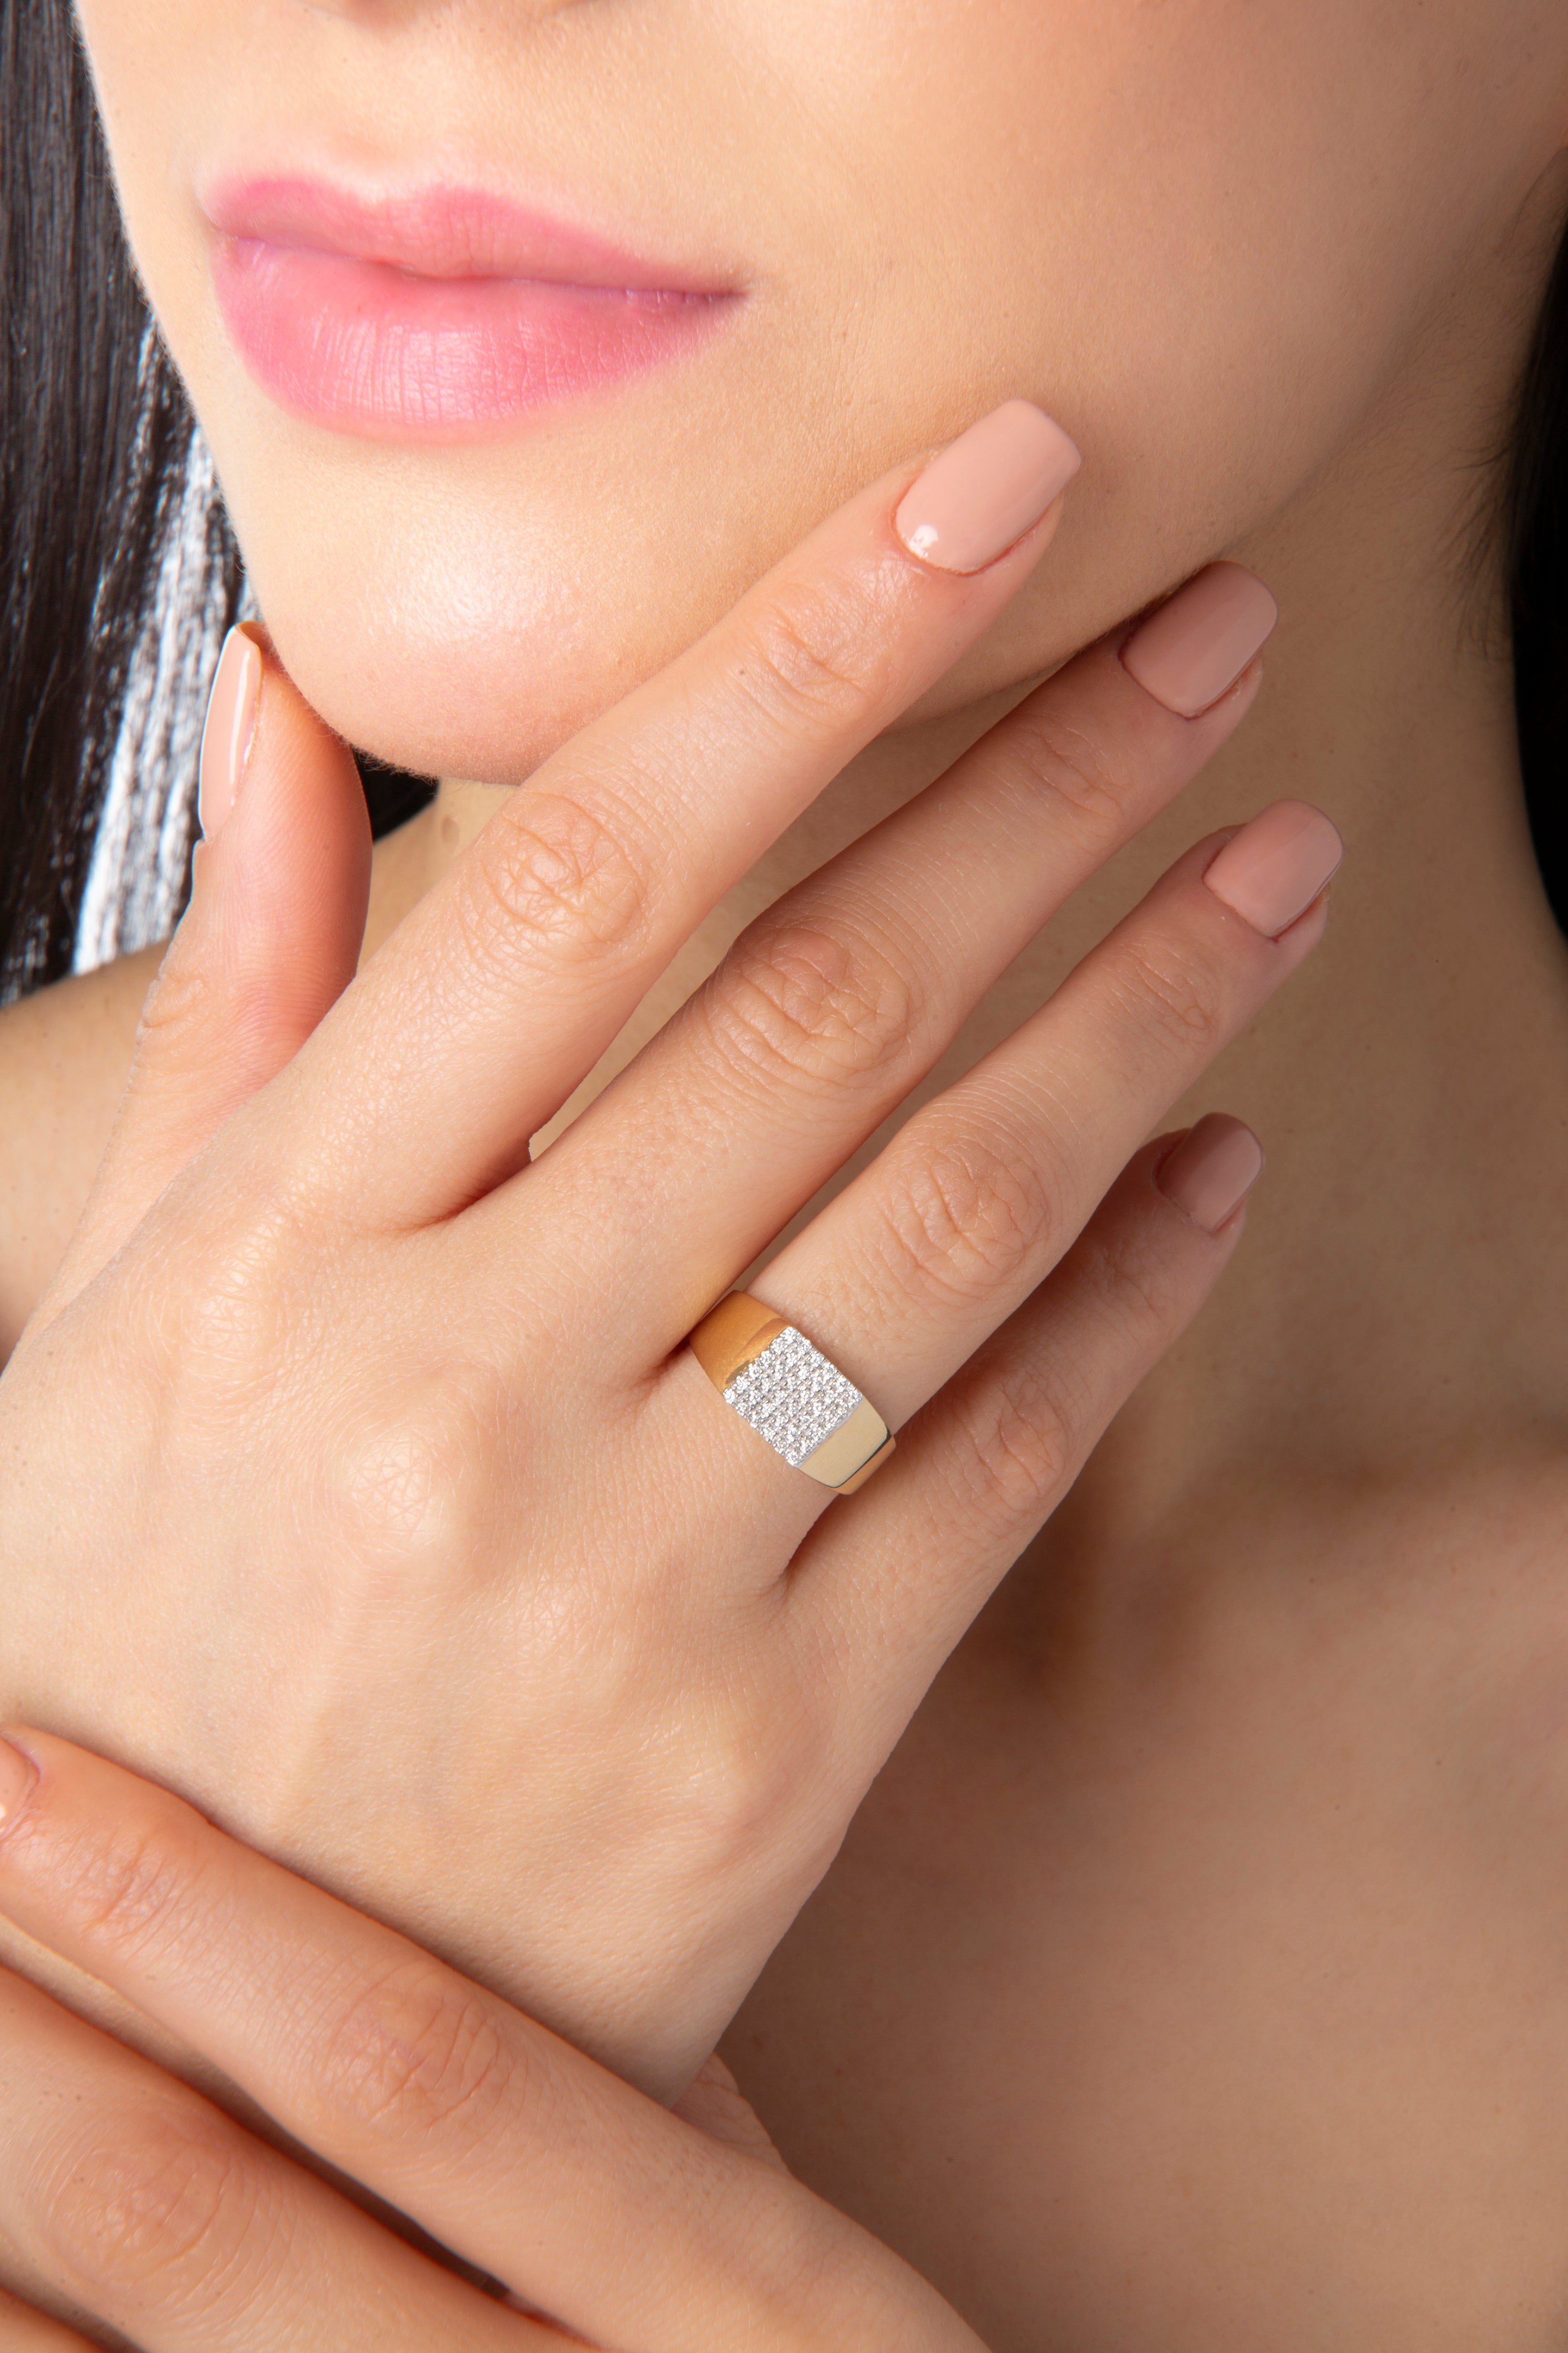 Pave Square Ring in Yellow Gold - Her Story Shop